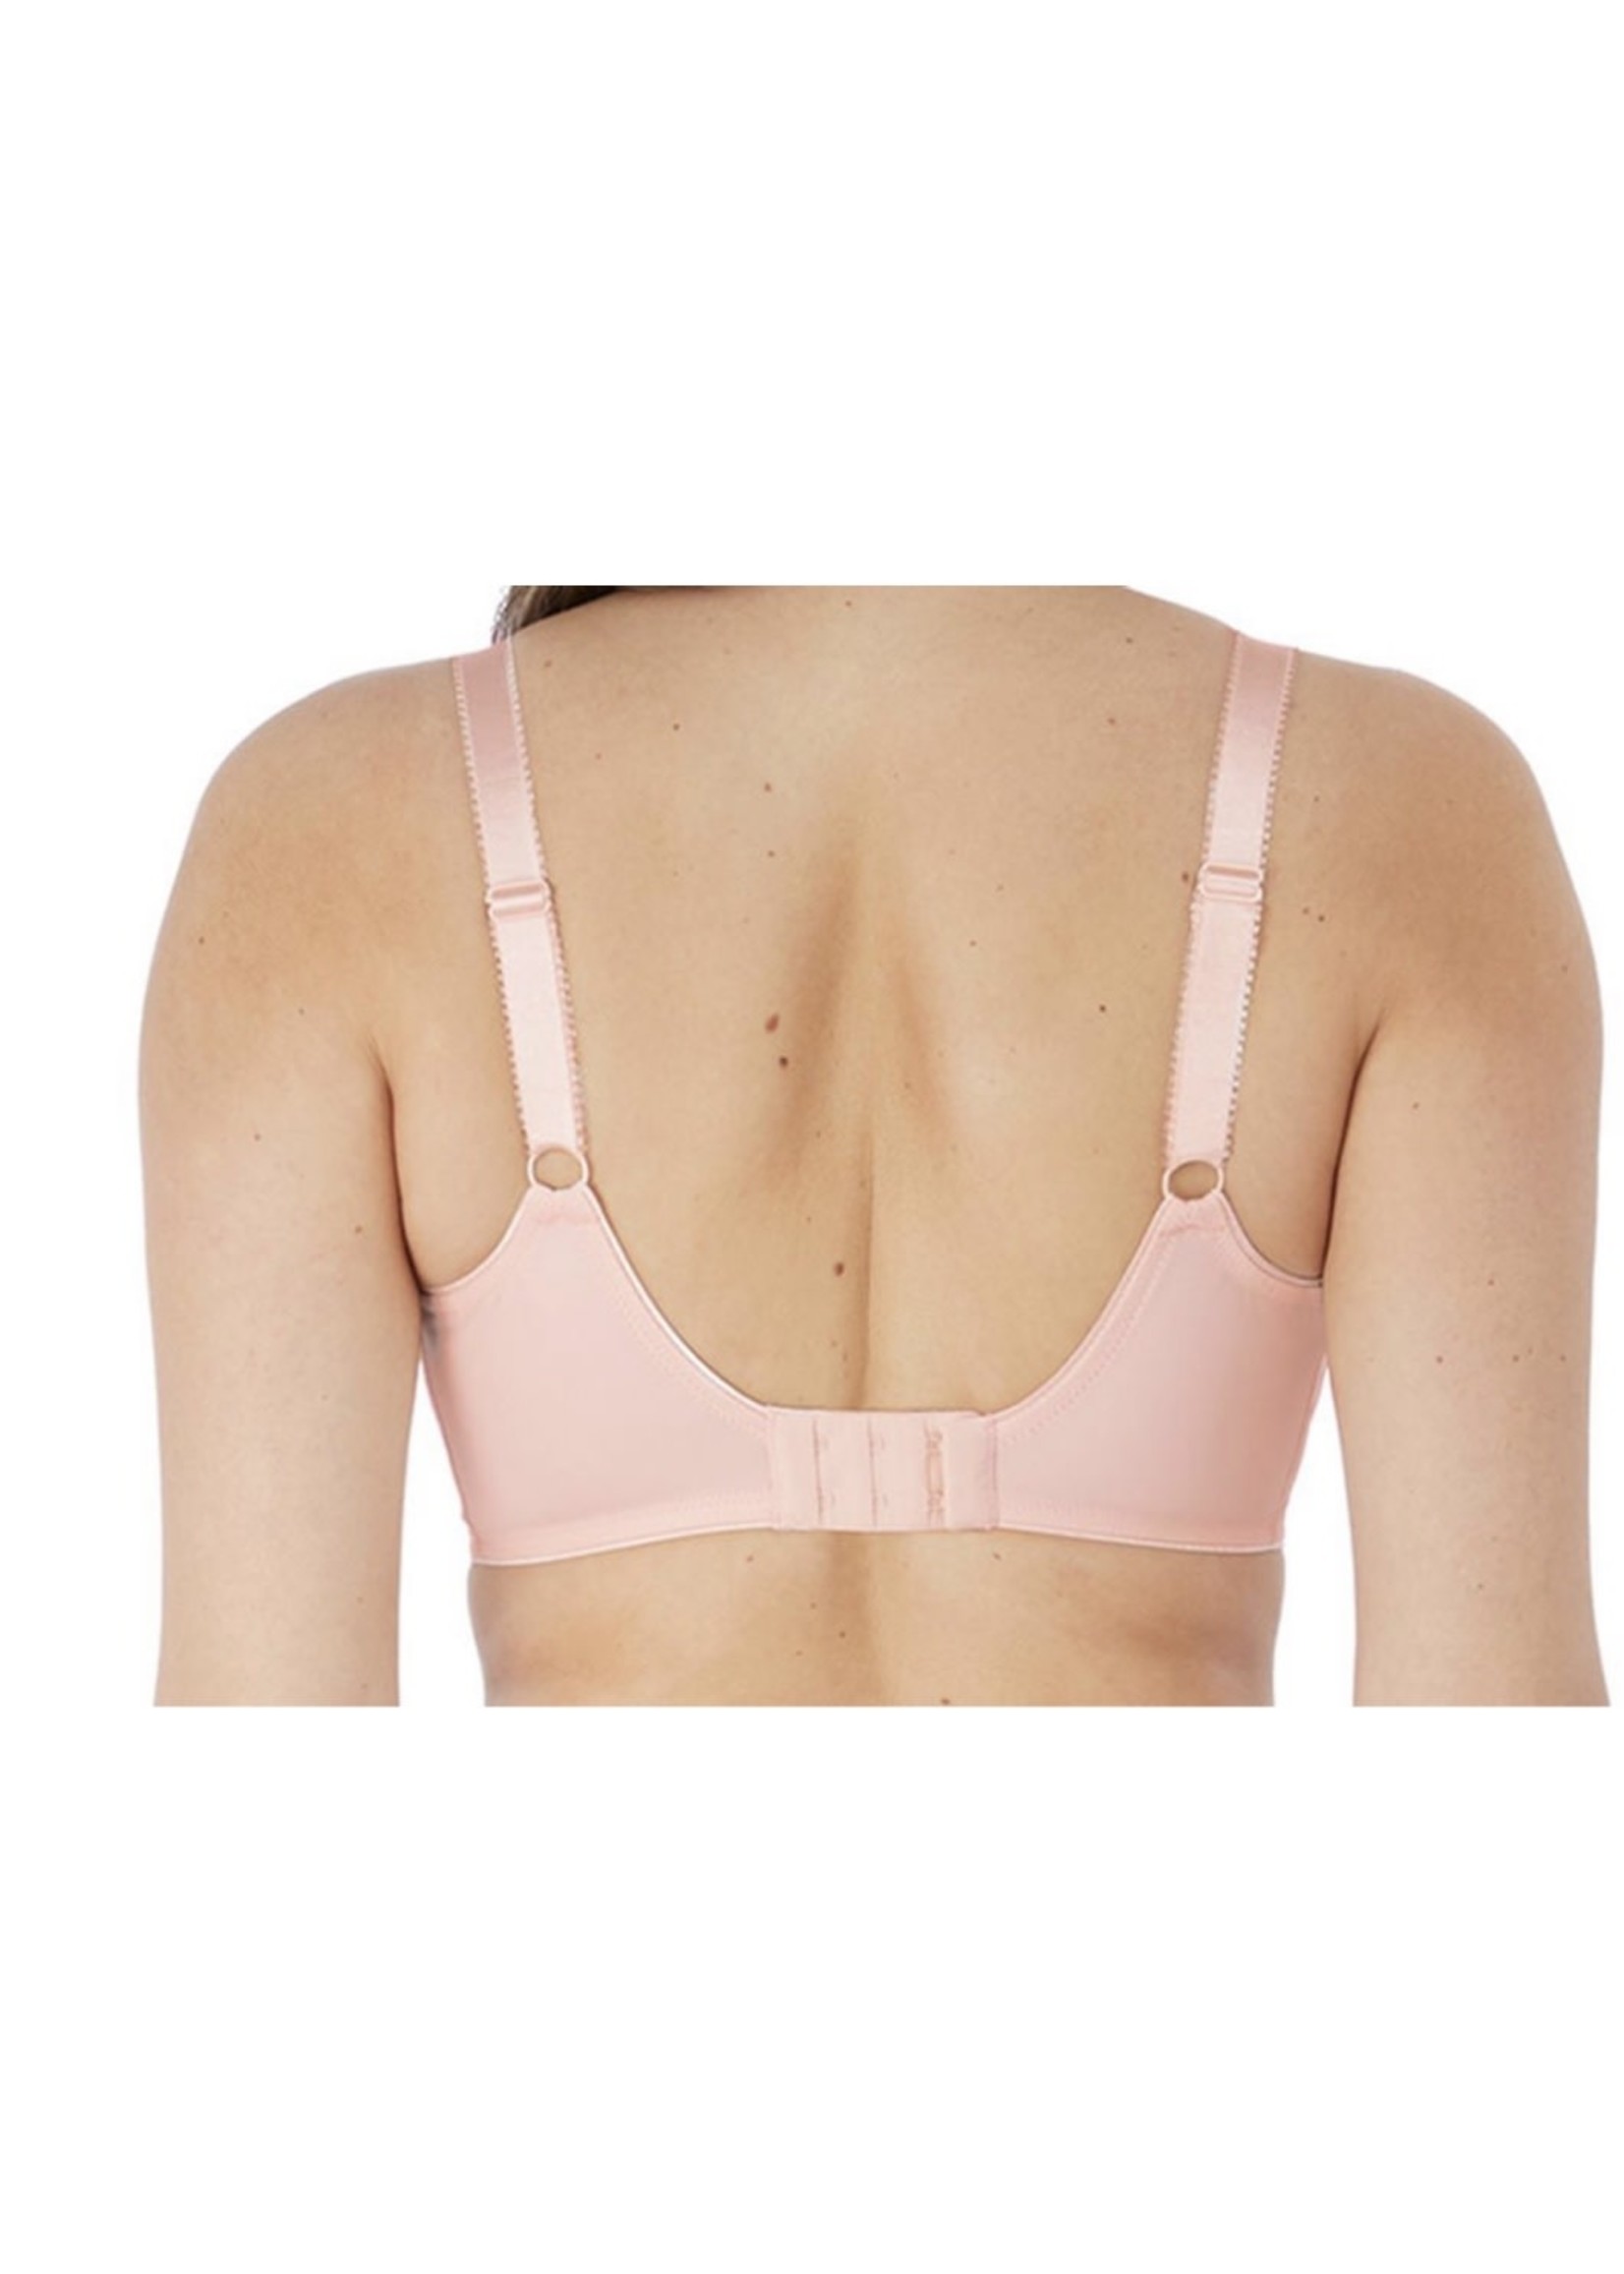 Fantasie FUSION UW FULL CUP SIDE SUPPORT BRA